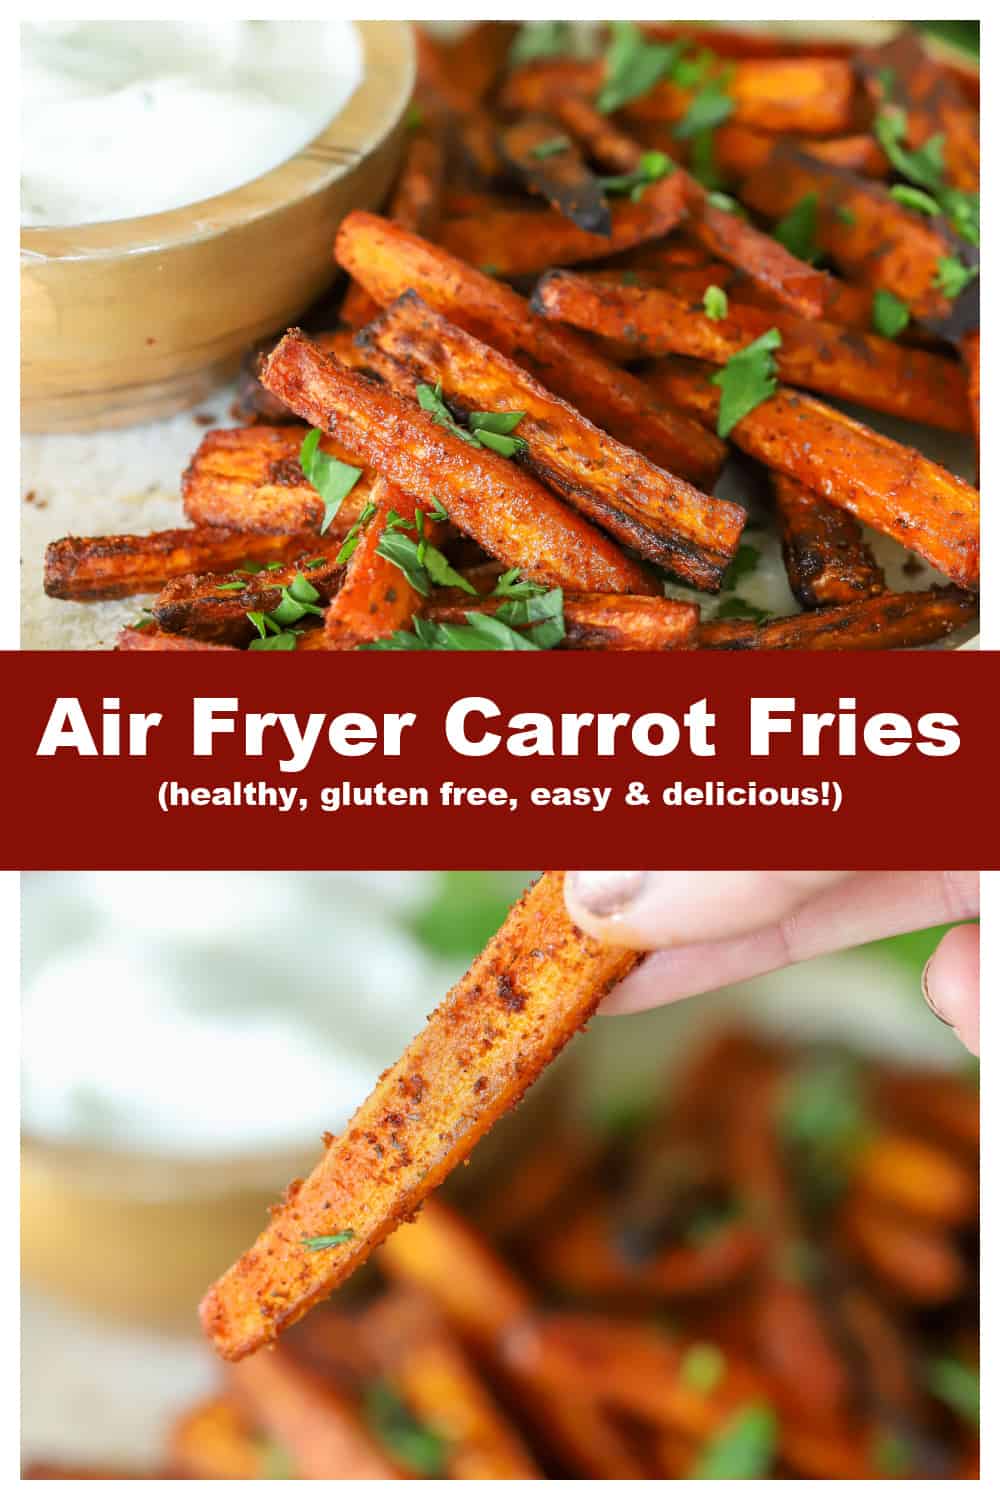 Want a new, fun way to eat your vegetables? These Air Fryer Carrot Fries are it! Healthy, gluten free, easy and absolutely delicious. via @jennikolaus